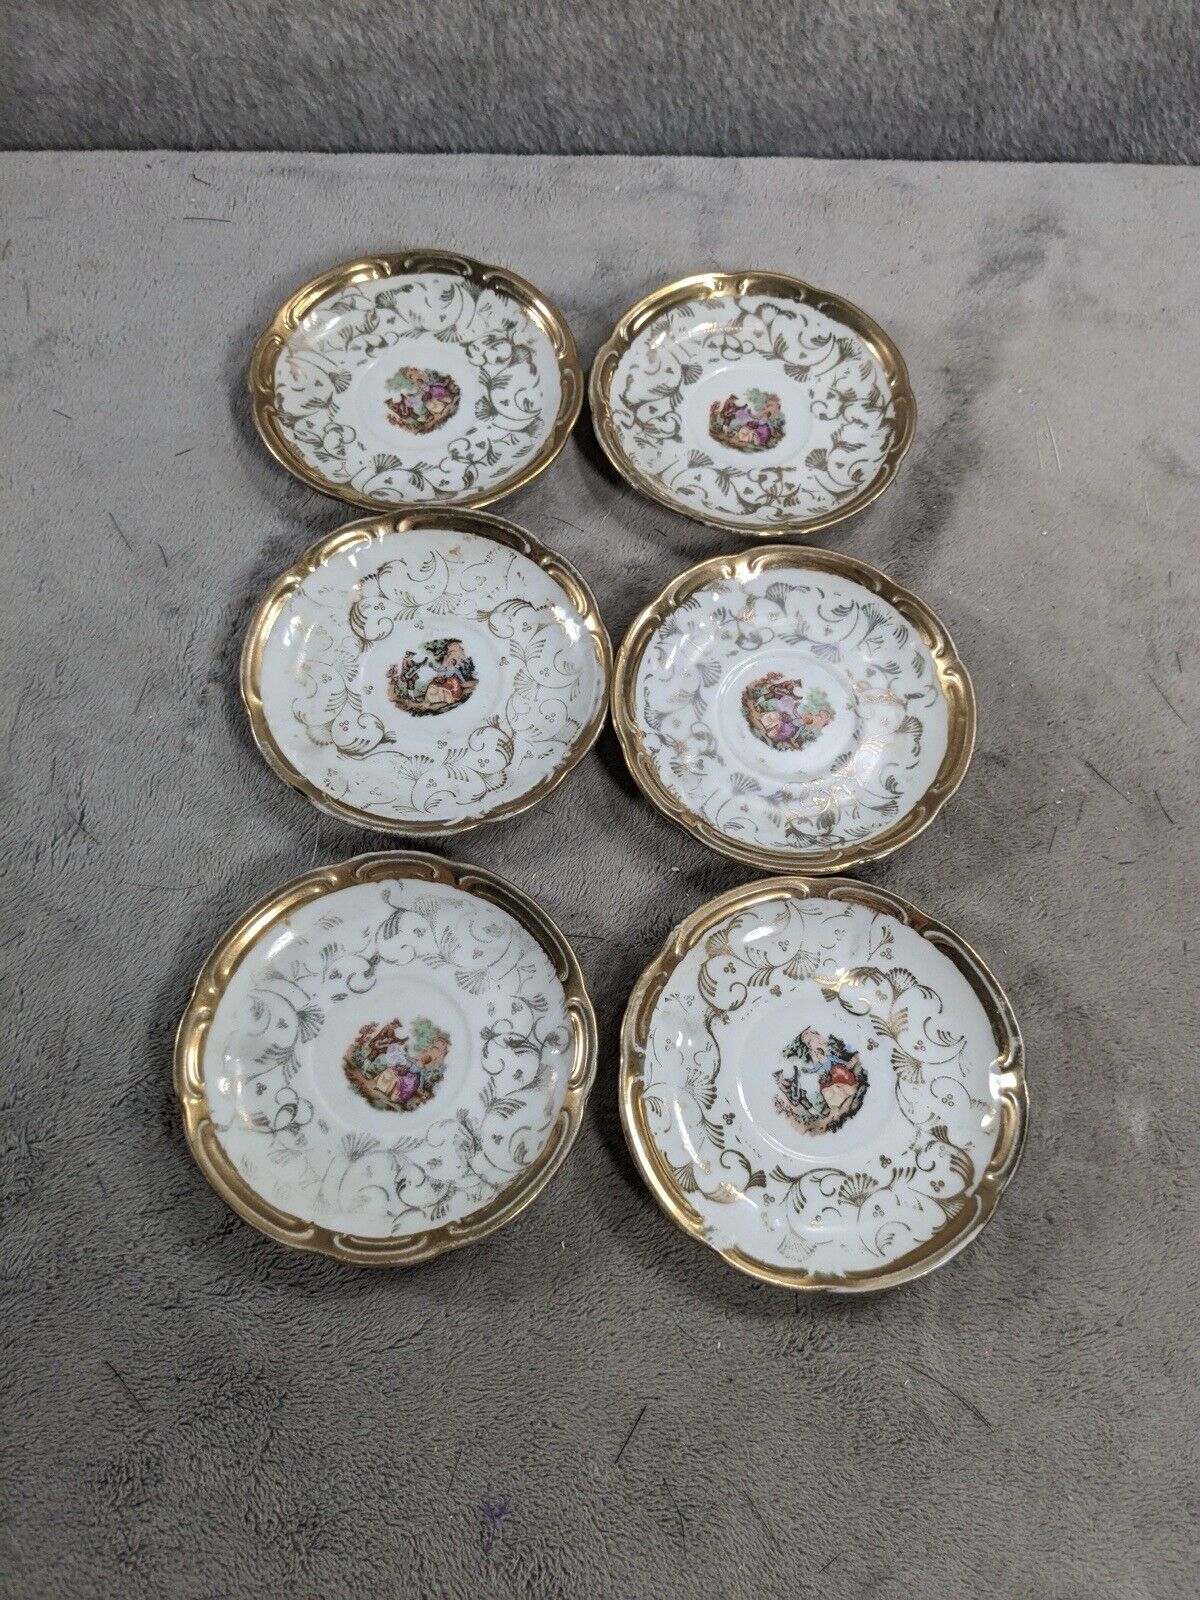 6 Vintage Bavaria Golden Fine China Porcelain Made In Germany 3.5” Small Plates